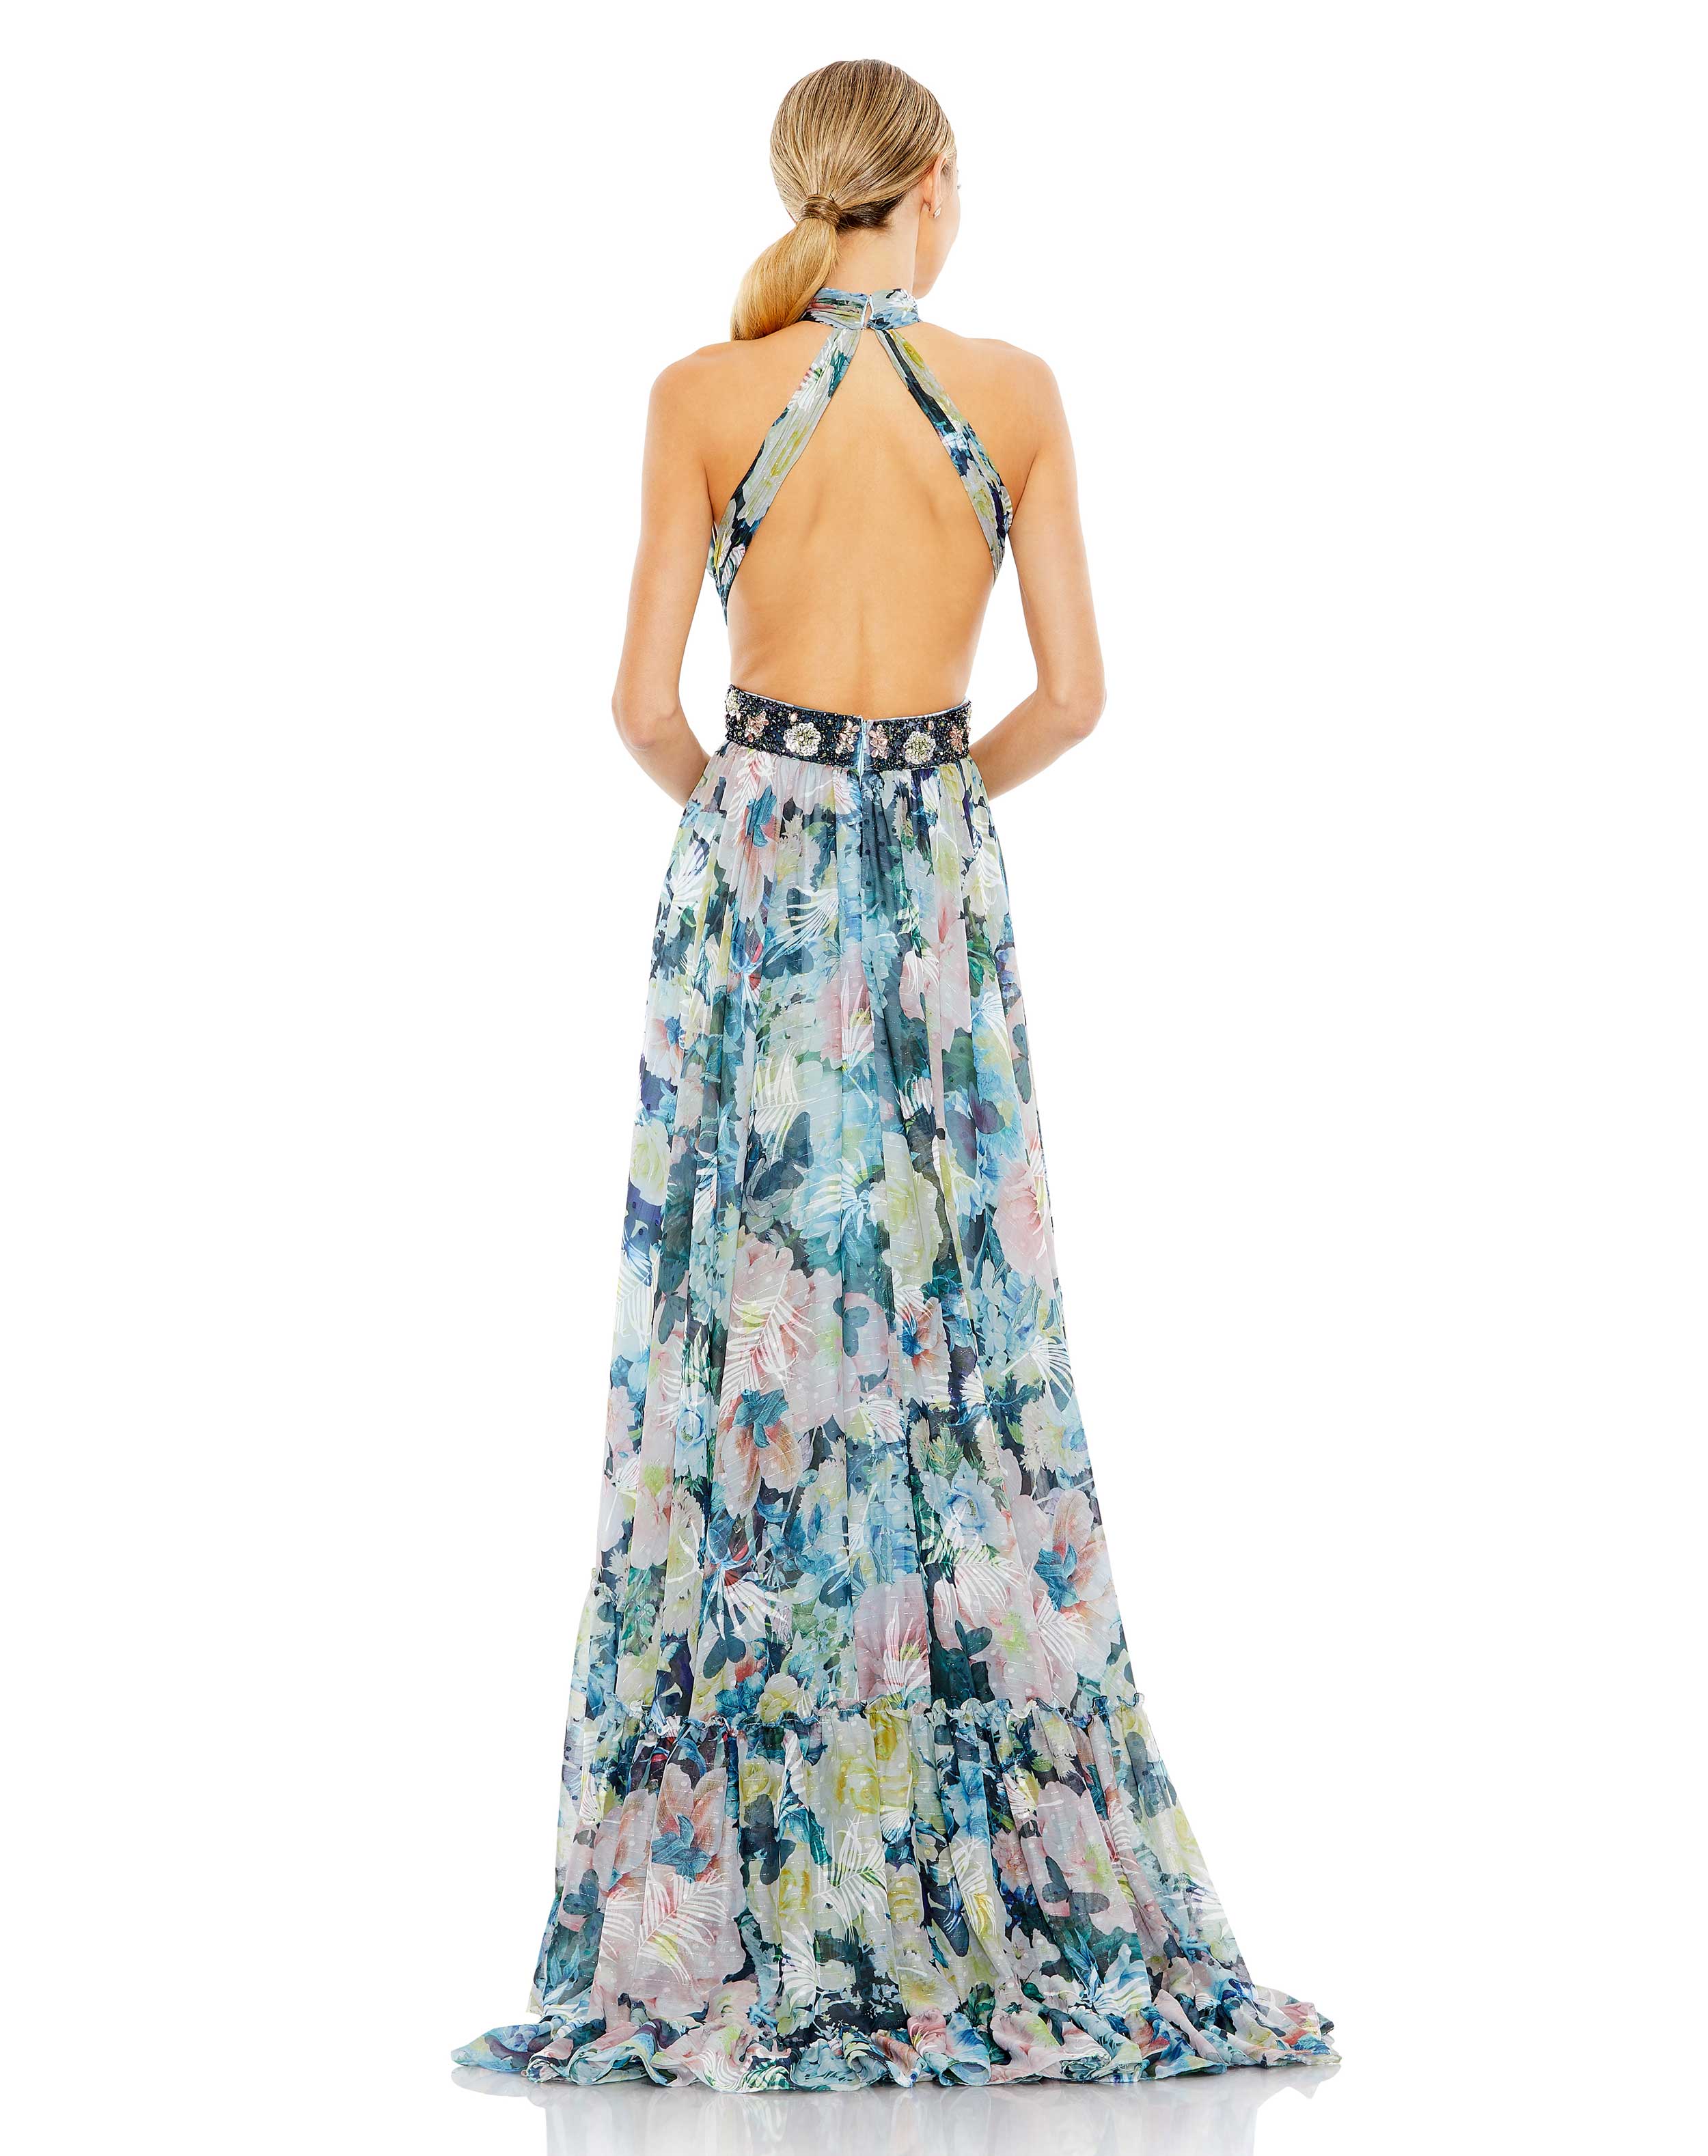 Floral Halter A Line Gown w/ Cutouts and Embellished Belt